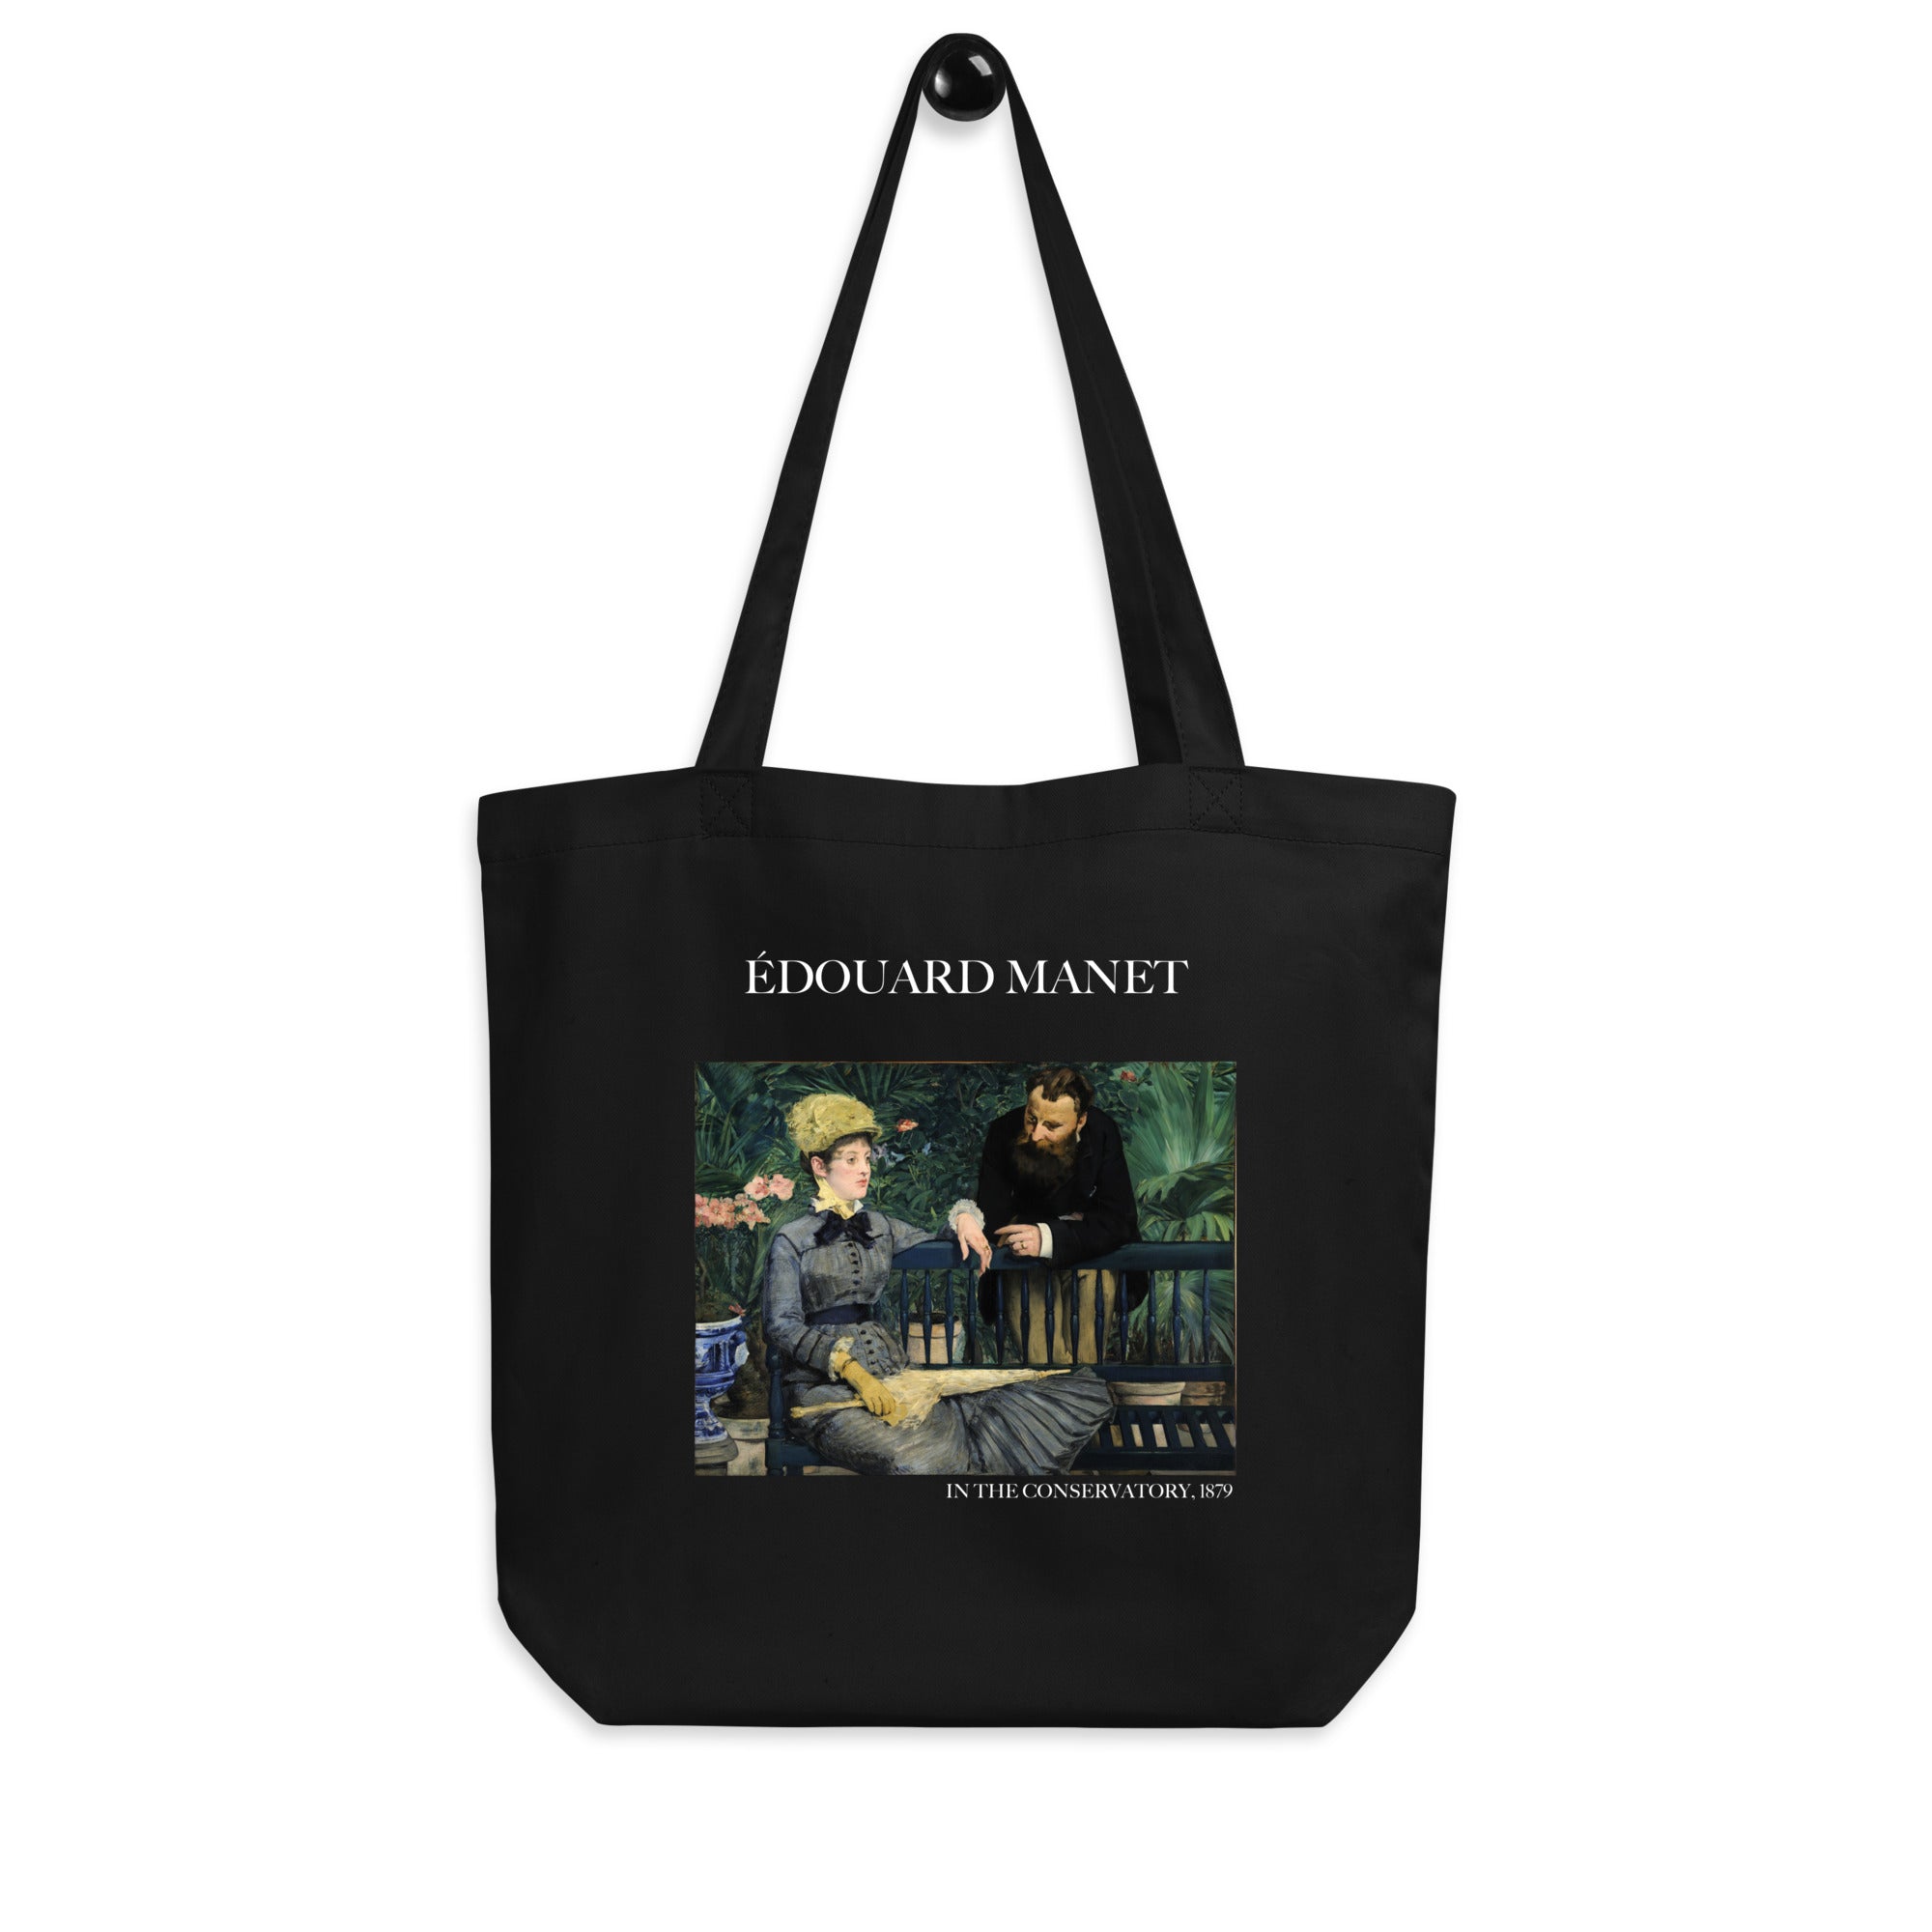 Édouard Manet 'In the Conservatory' Famous Painting Totebag | Eco Friendly Art Tote Bag